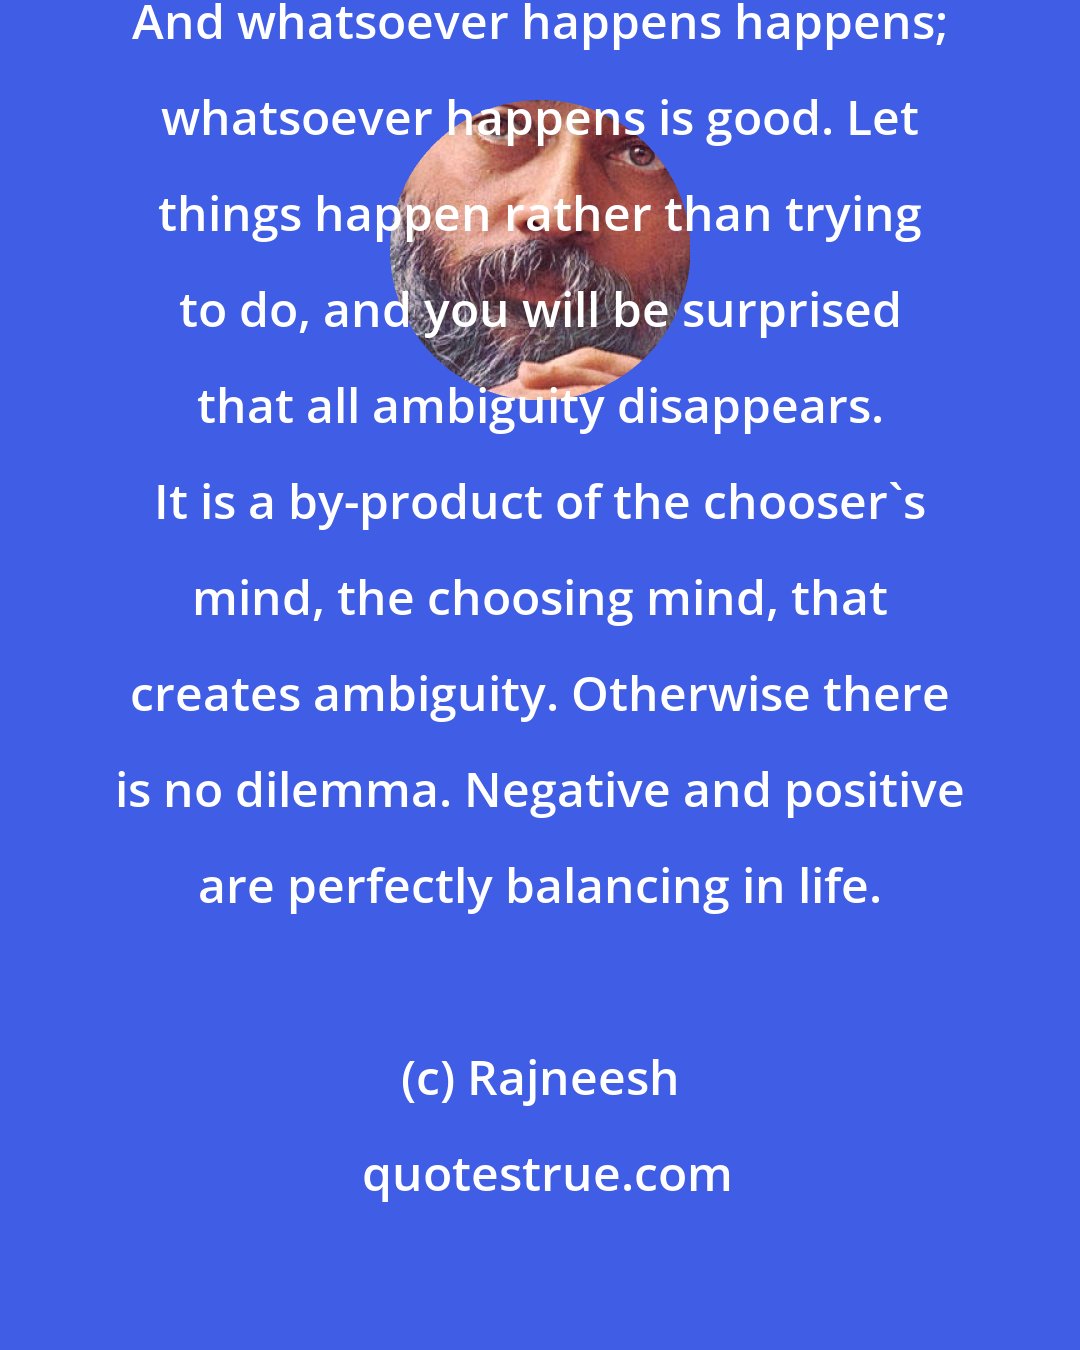 Rajneesh: No need to choose; become choiceless. And whatsoever happens happens; whatsoever happens is good. Let things happen rather than trying to do, and you will be surprised that all ambiguity disappears. It is a by-product of the chooser's mind, the choosing mind, that creates ambiguity. Otherwise there is no dilemma. Negative and positive are perfectly balancing in life.